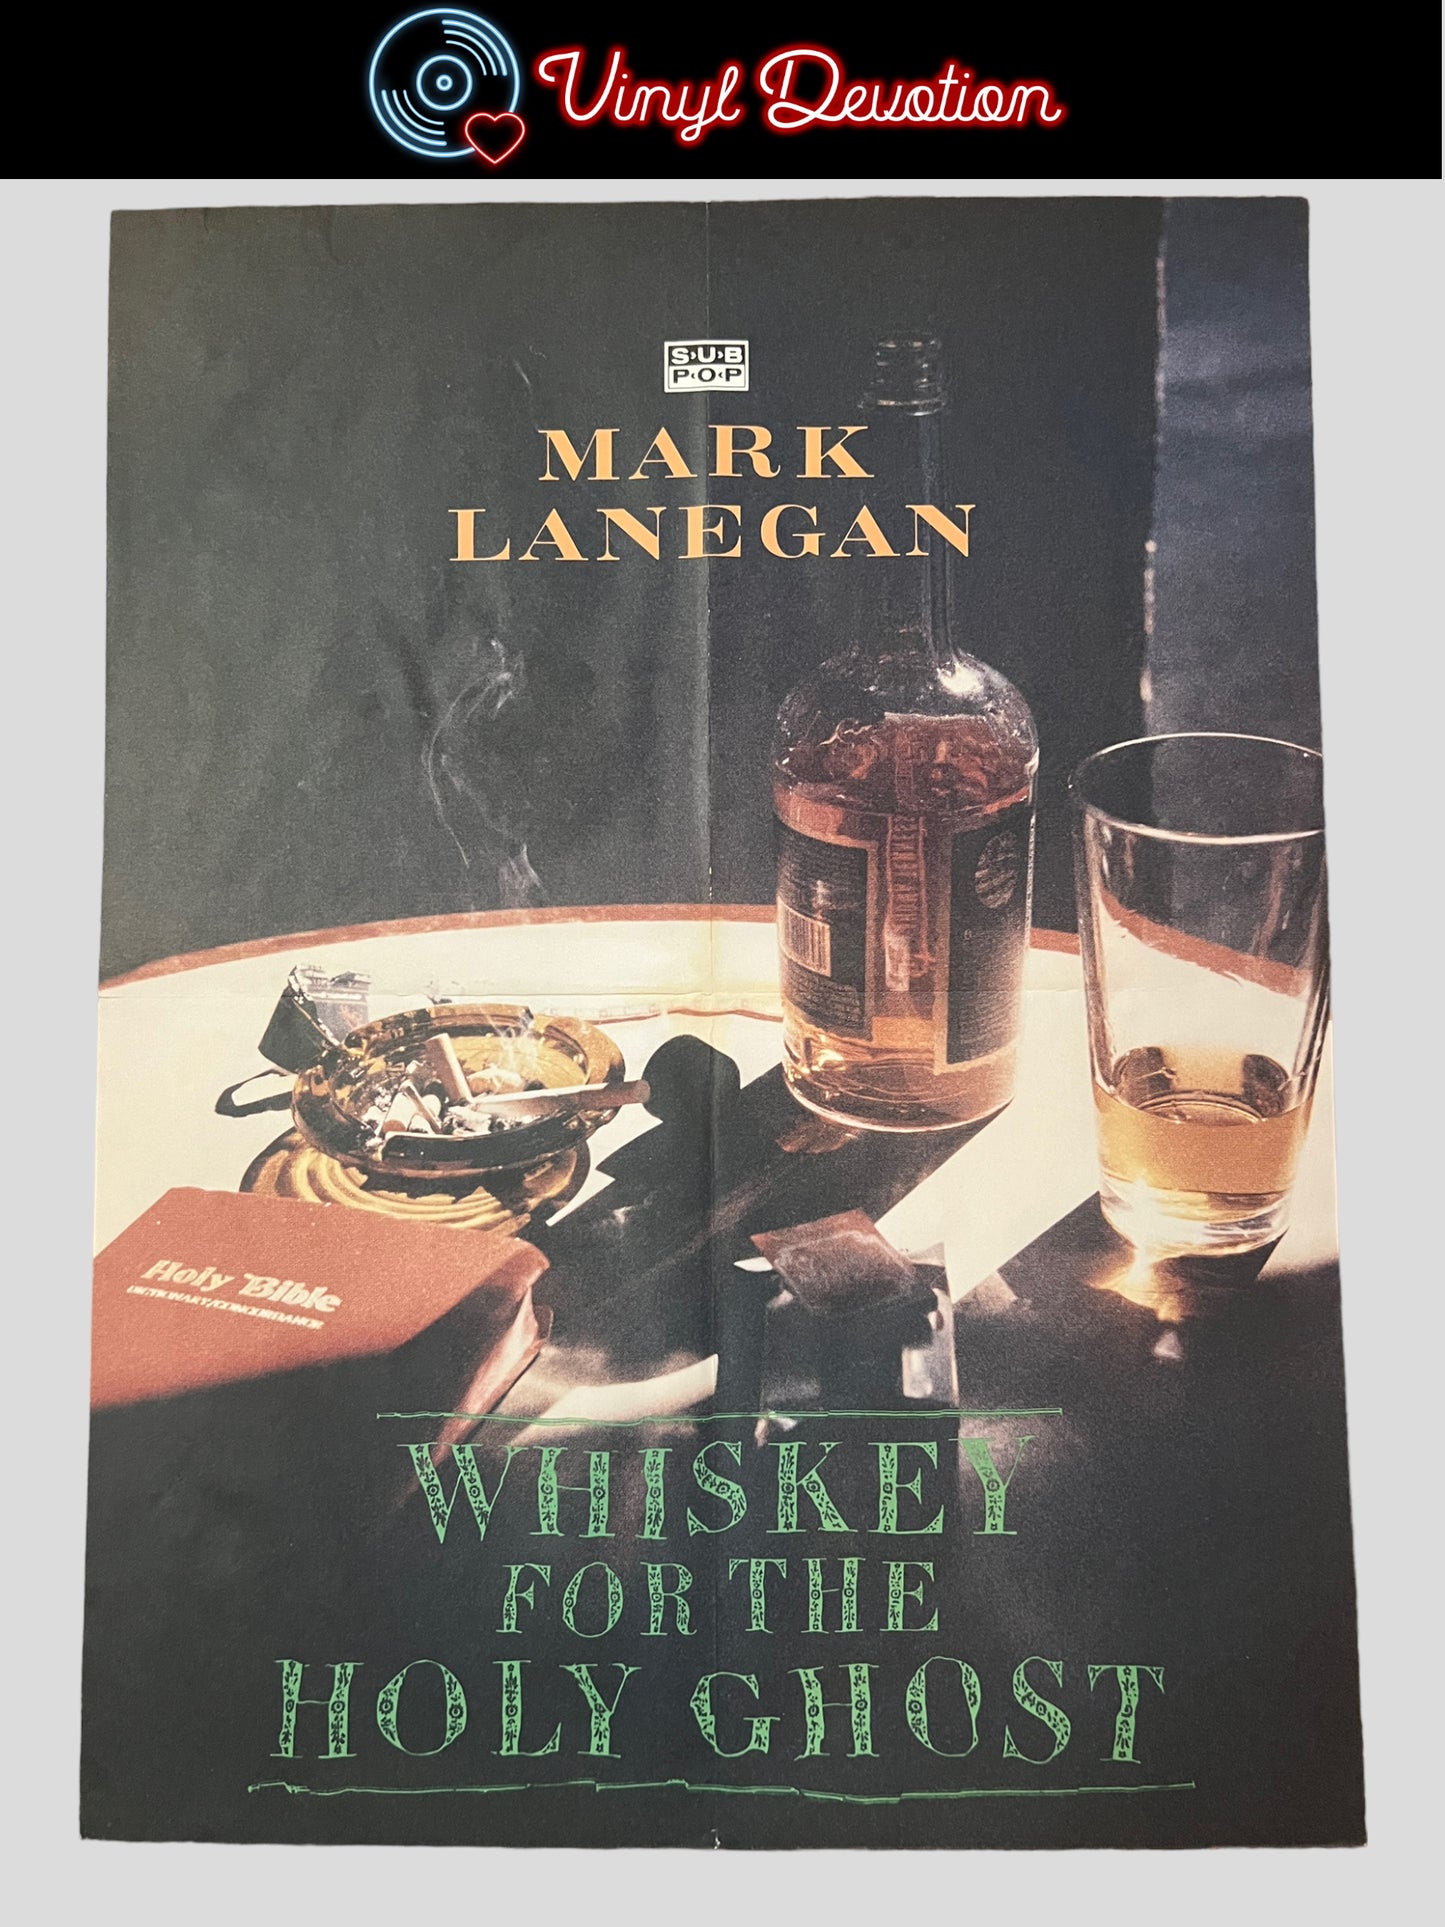 Mark Lanegan - Whiskey for the Holy Ghost Vintage 1994 Promo Poster 18 x 24 inches